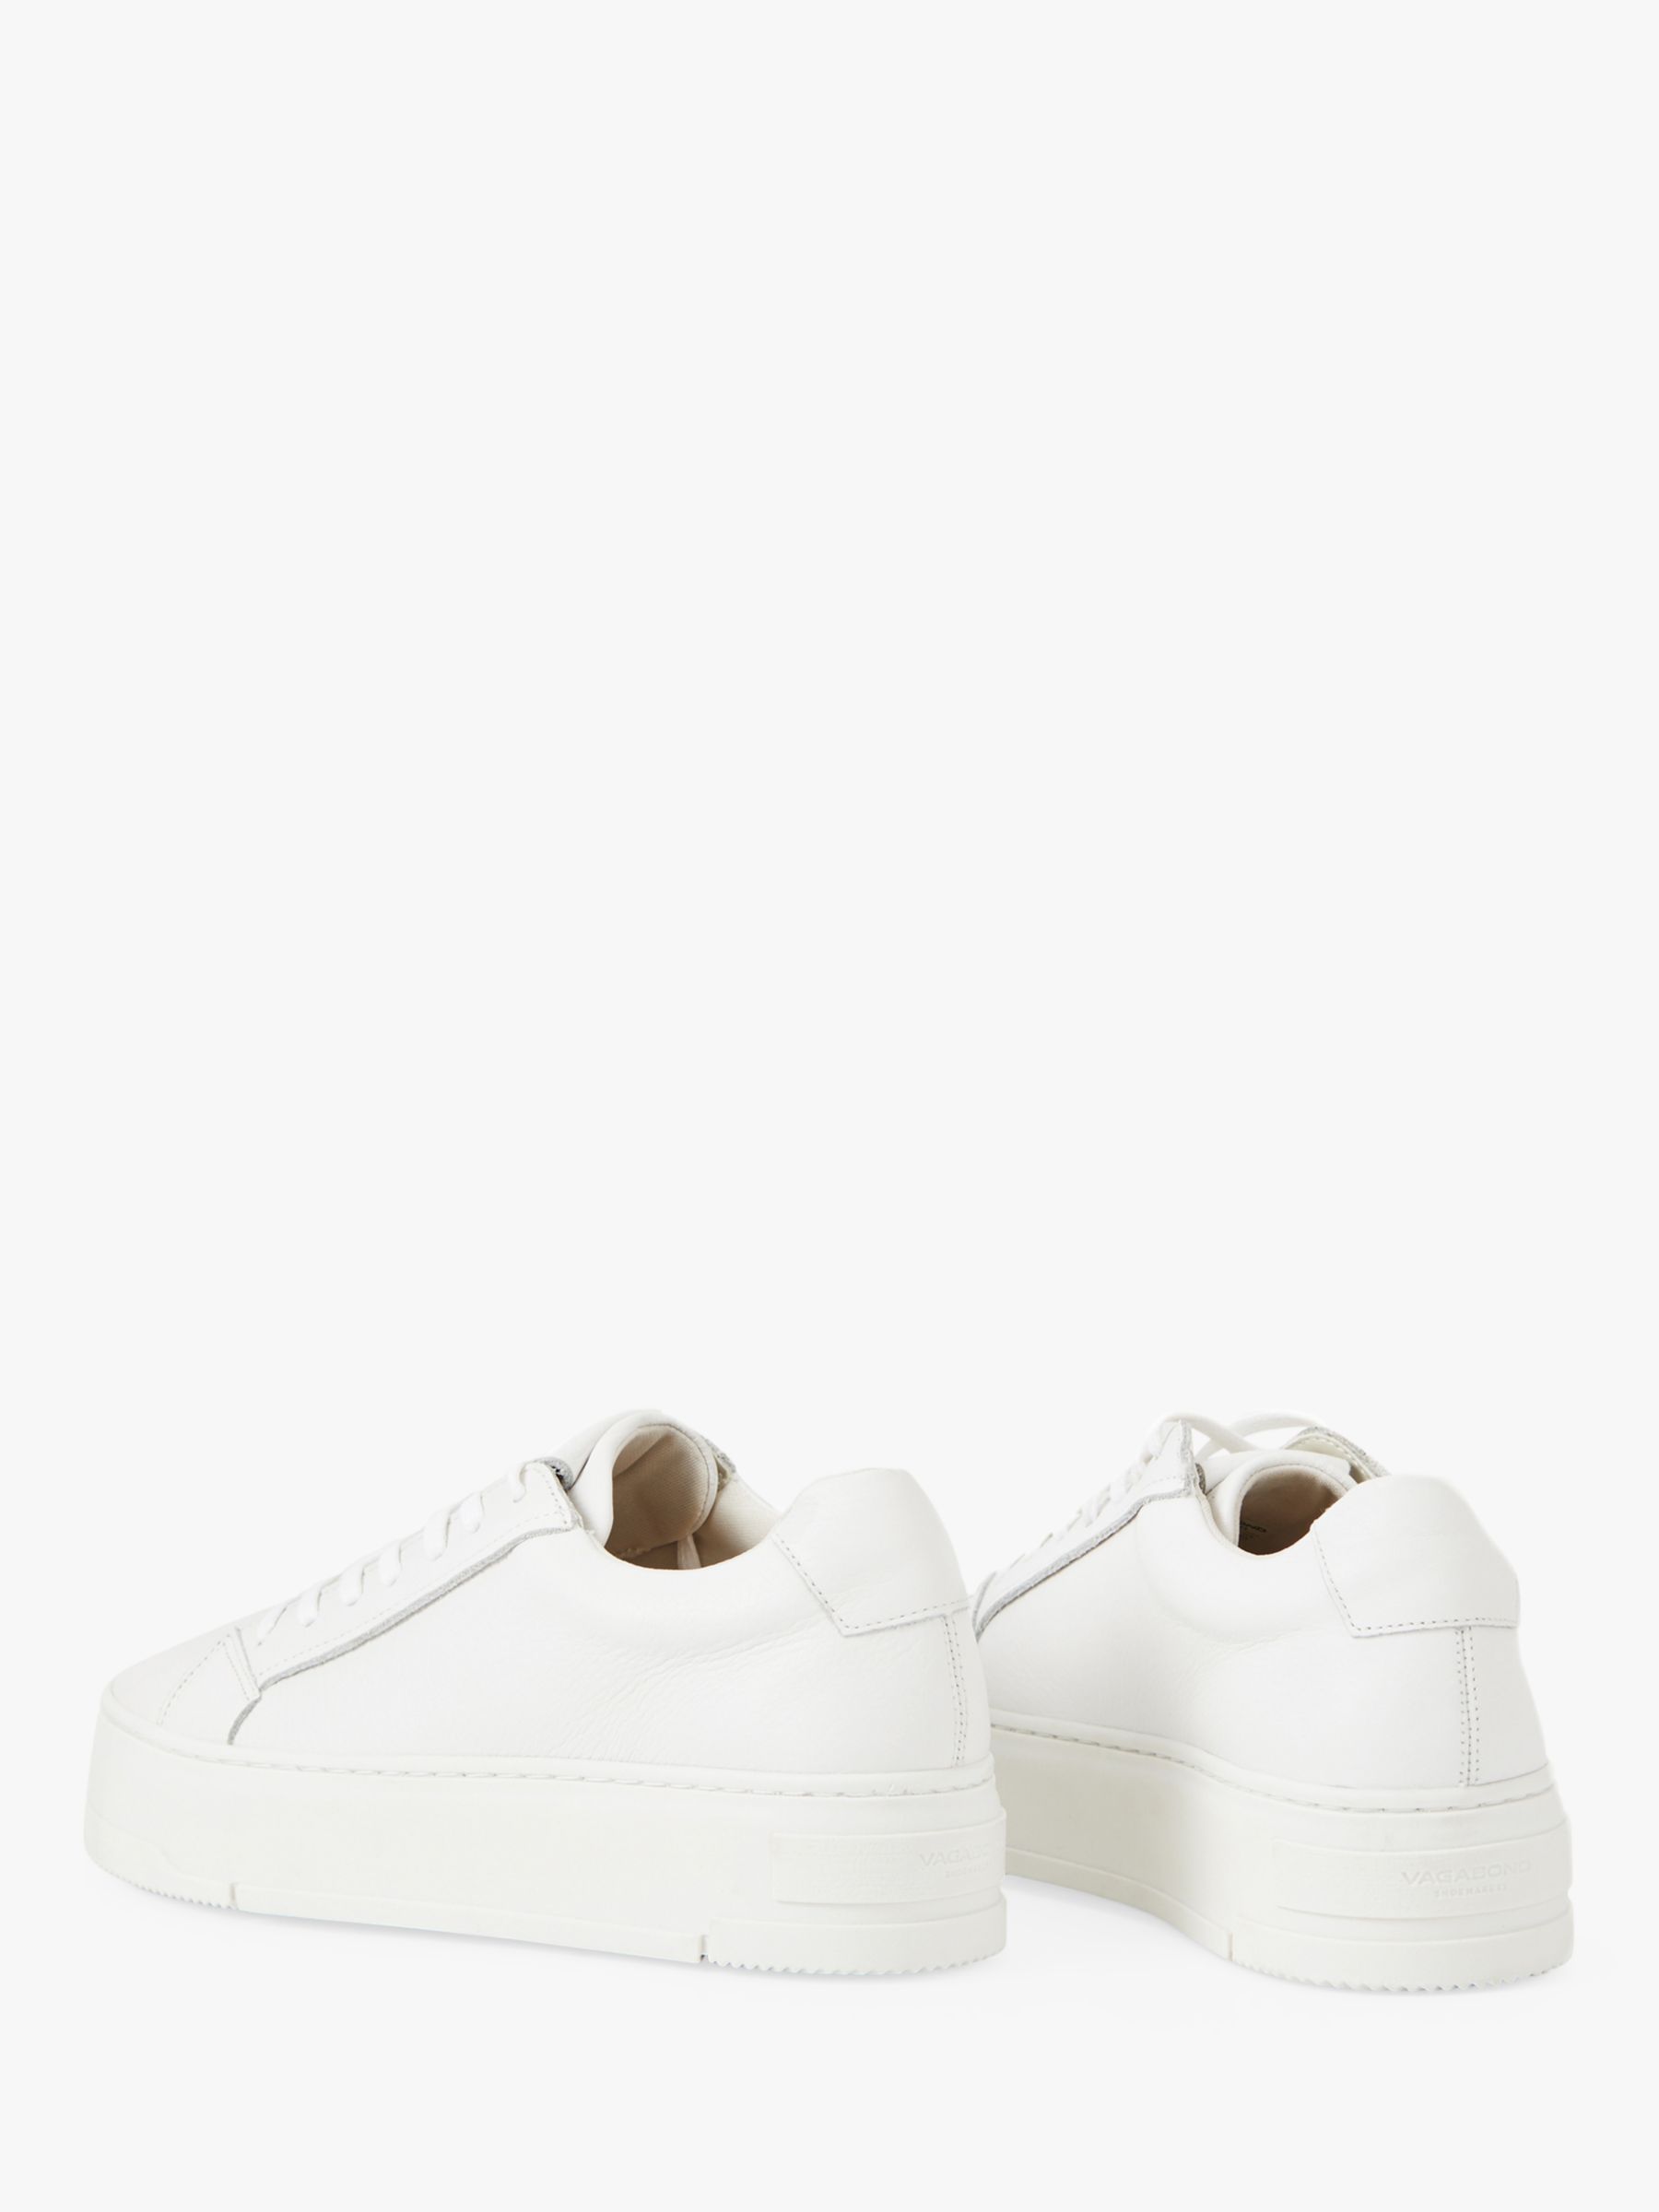 Vagabond Shoemakers Judy Leather Trainers, White at John Lewis & Partners